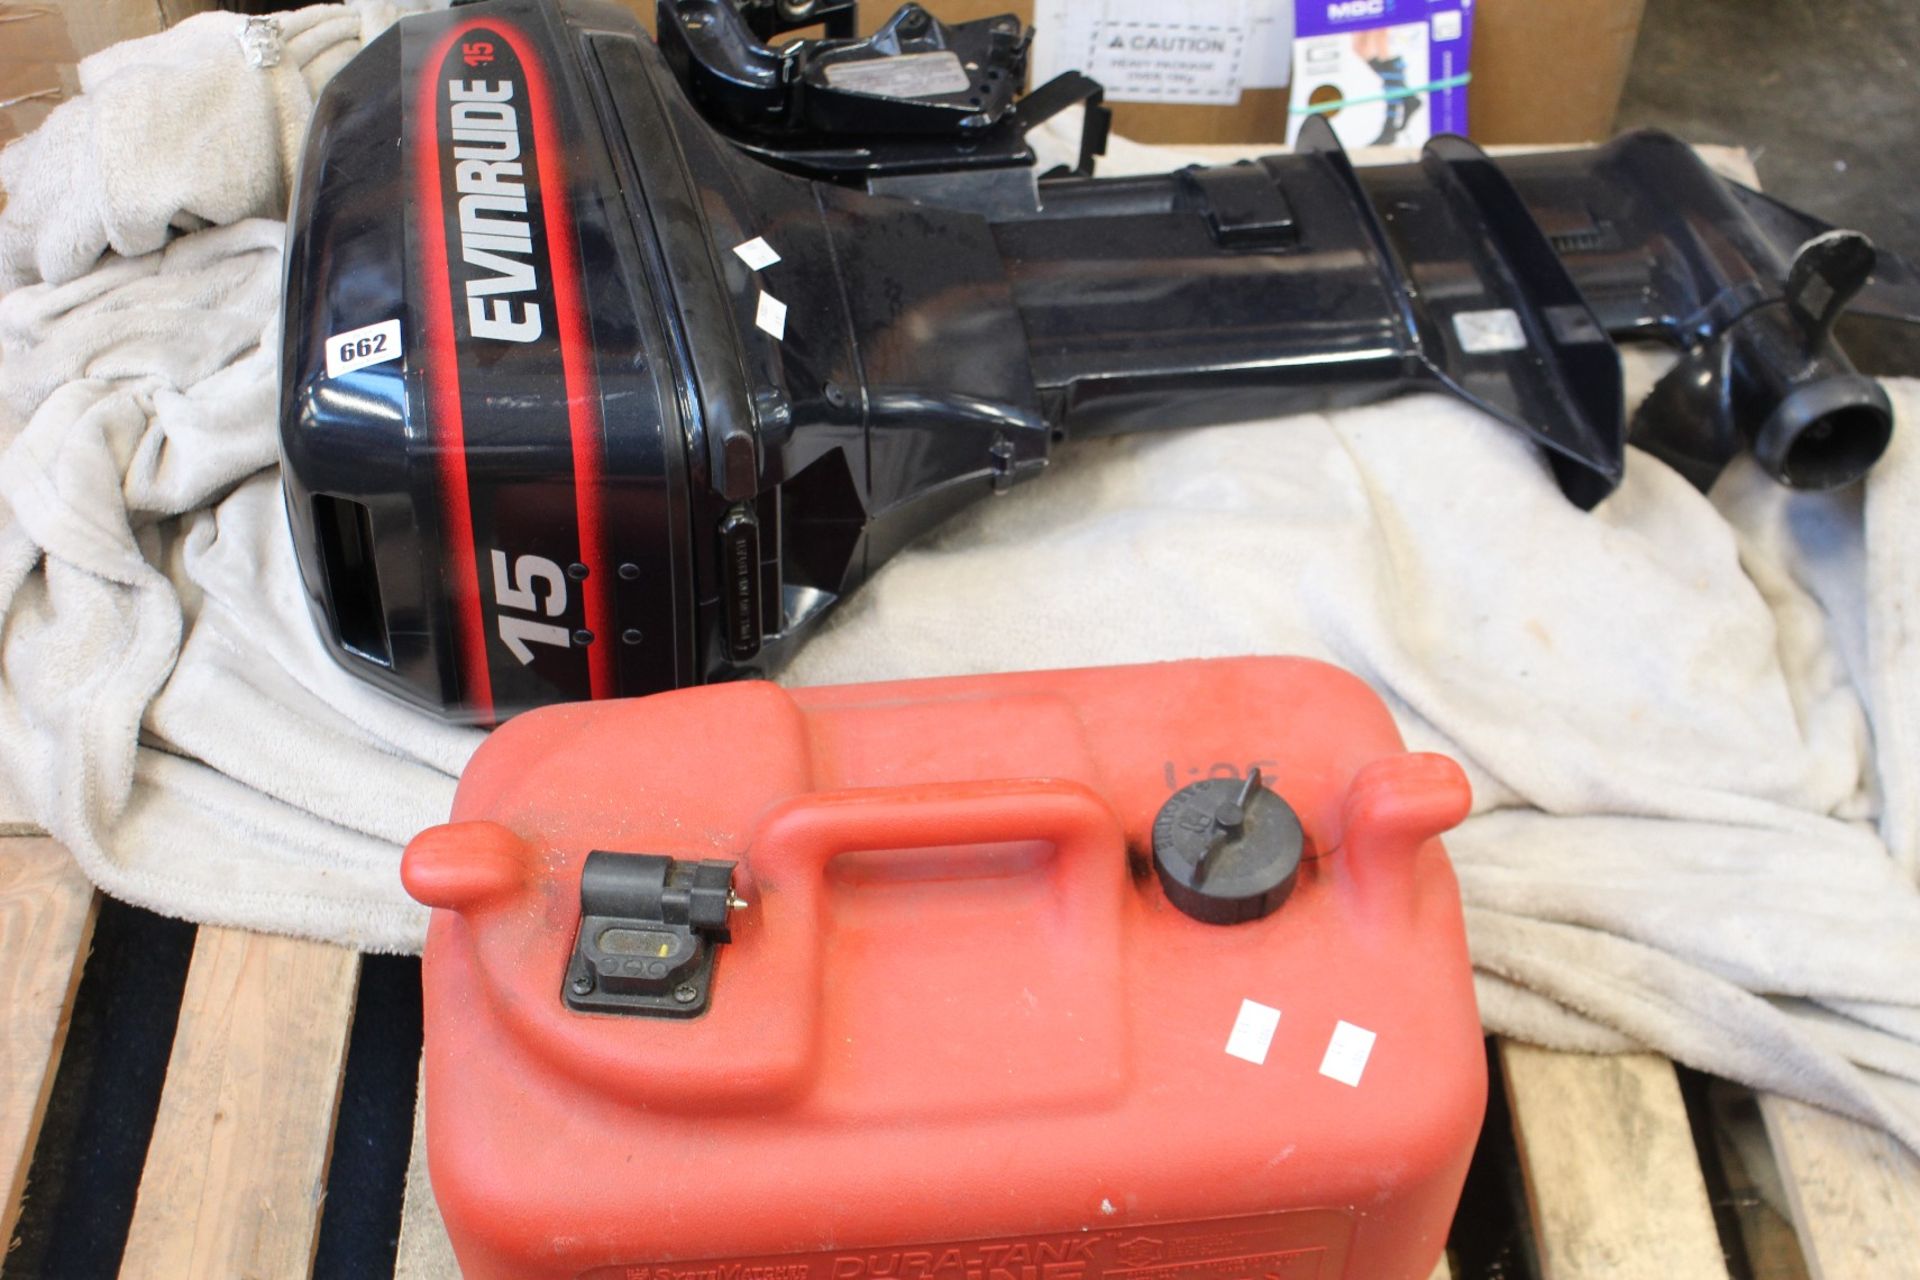 A pre-owned Evinrude 15 1998 unleaded fuel outboard motor and a pre-owned Dura-Tank container (